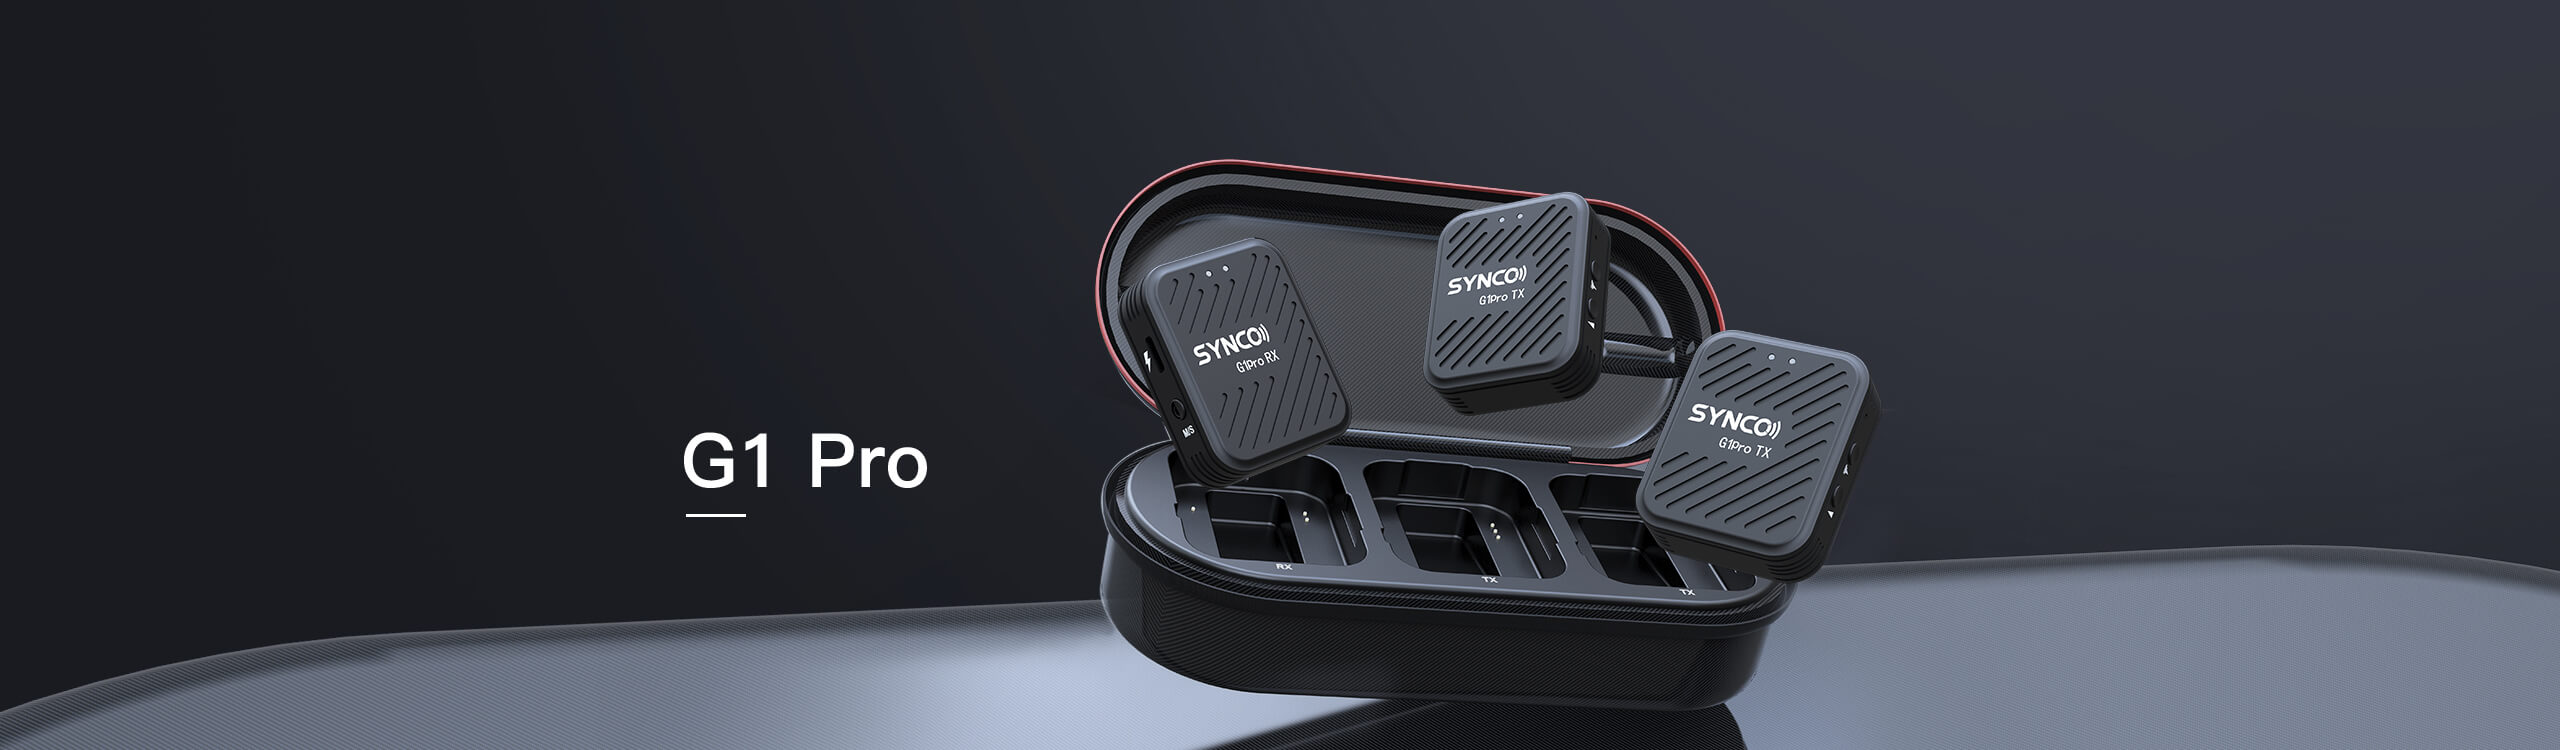 SYNCO G1 Pro wireless tie clip microphone consists of two transmitters, a receiver, and a charging & carrying box.